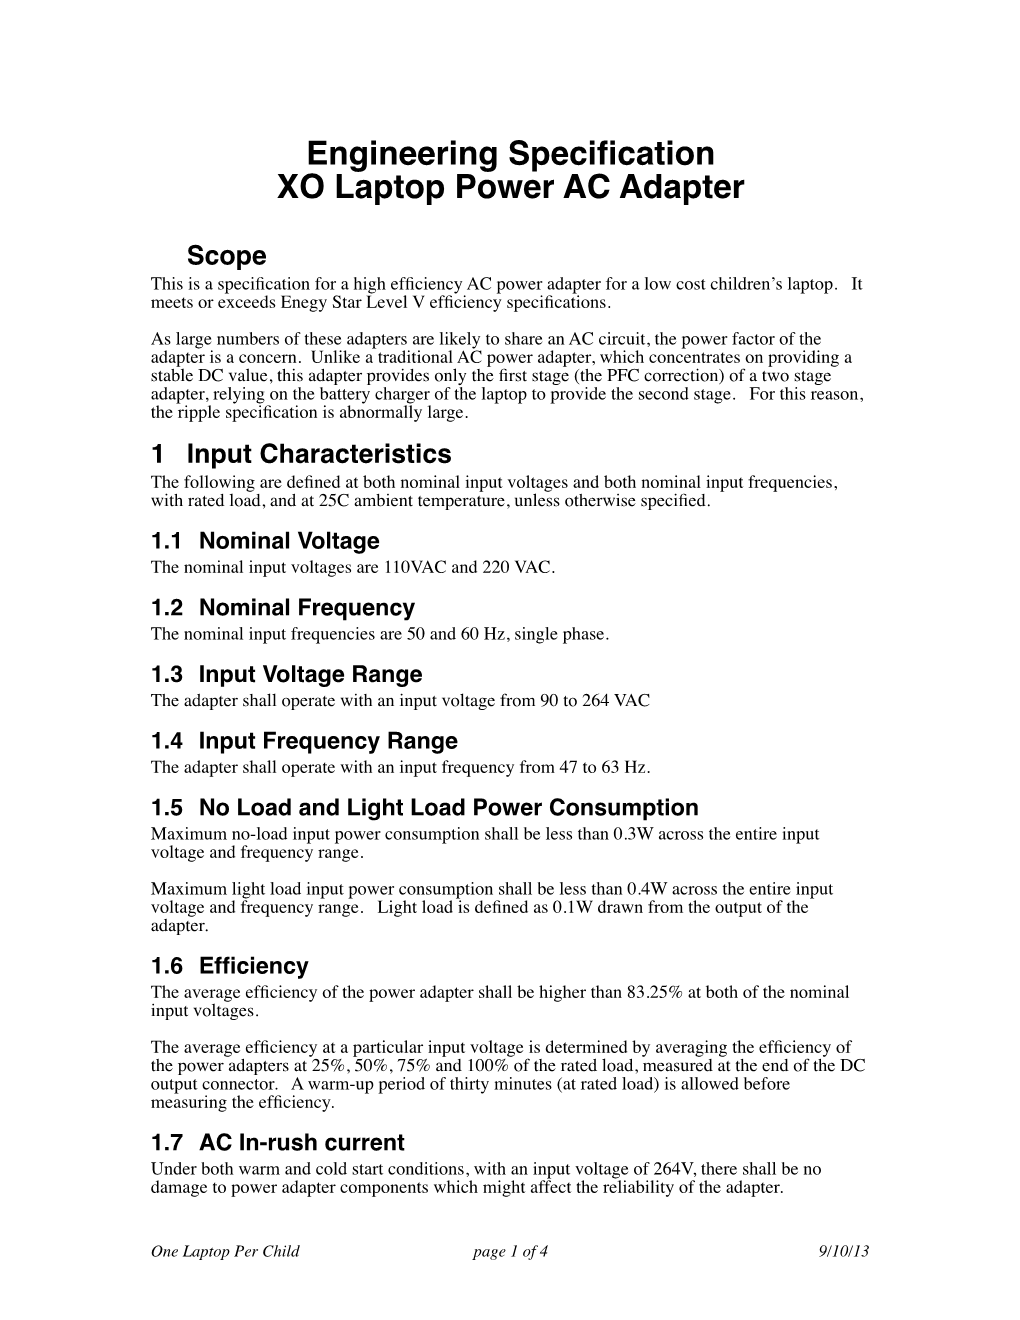 Engineering Specification XO Laptop Power AC Adapter